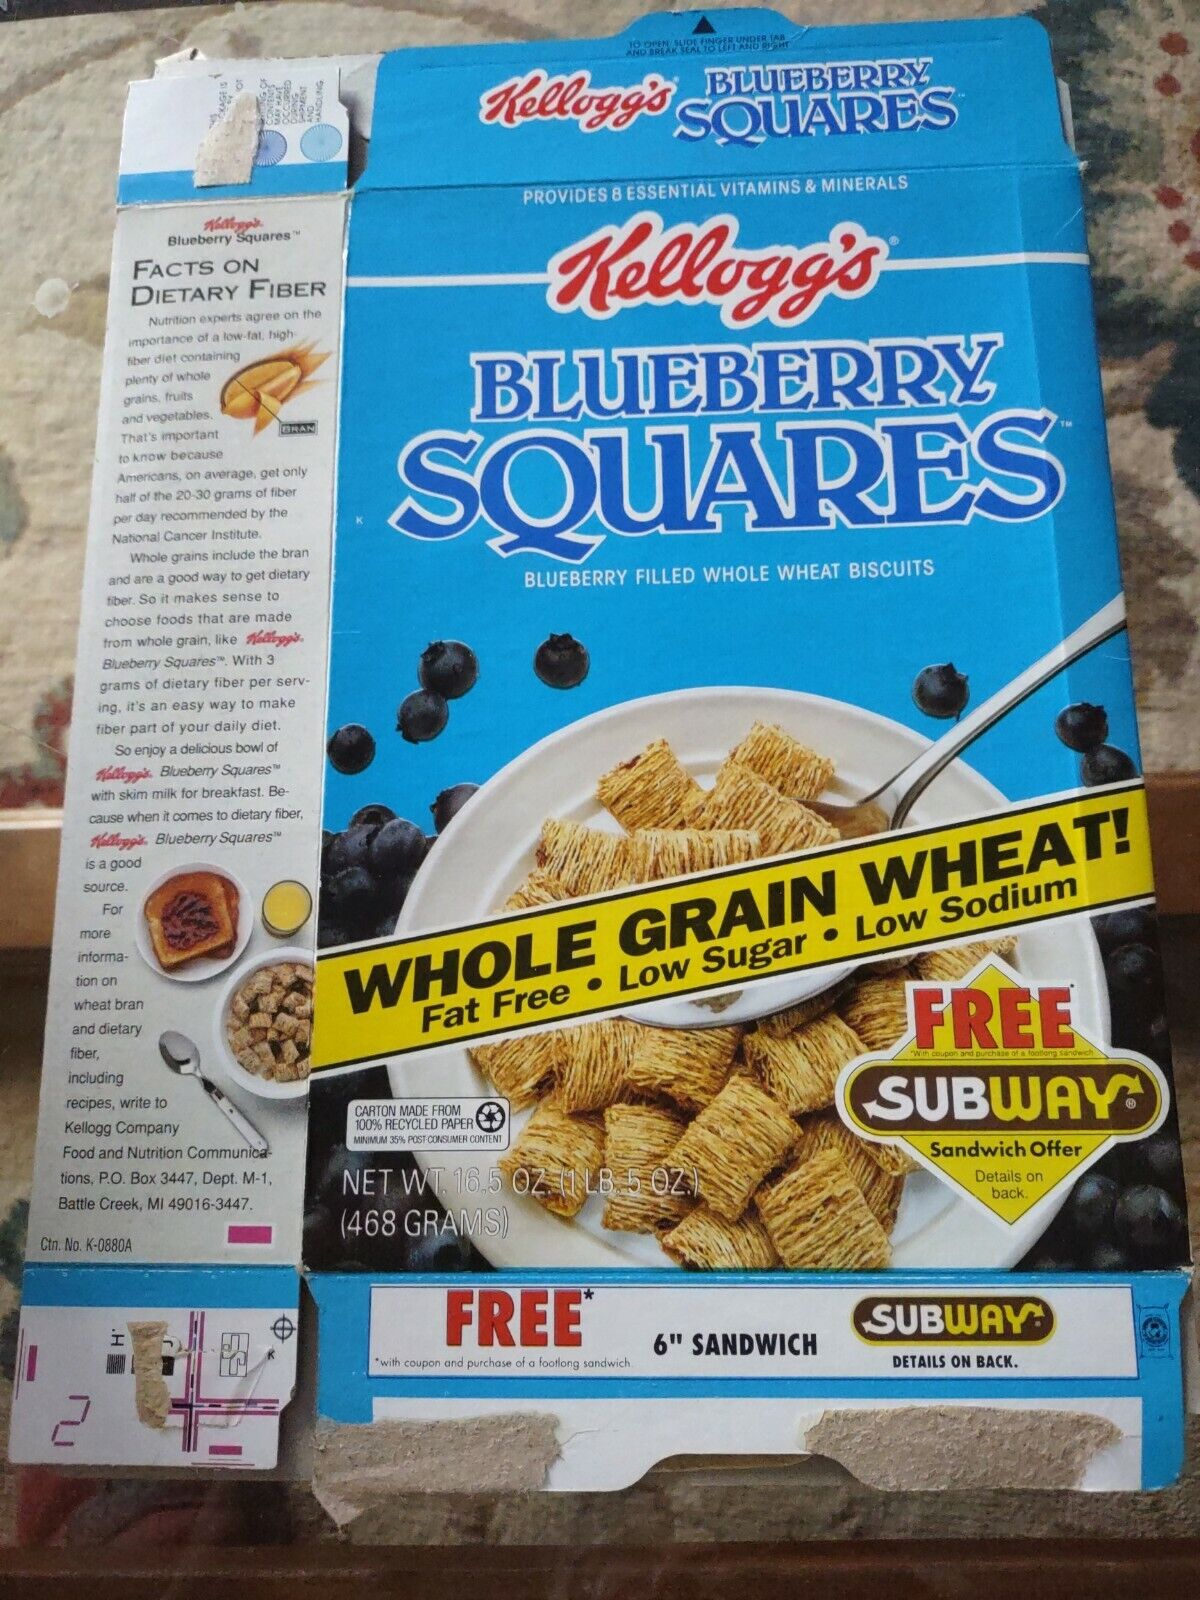 1992 KELLOGG'S Blueberry SQUARES EMPTY CEREAL  BOX Free Subway Sandwich Offer